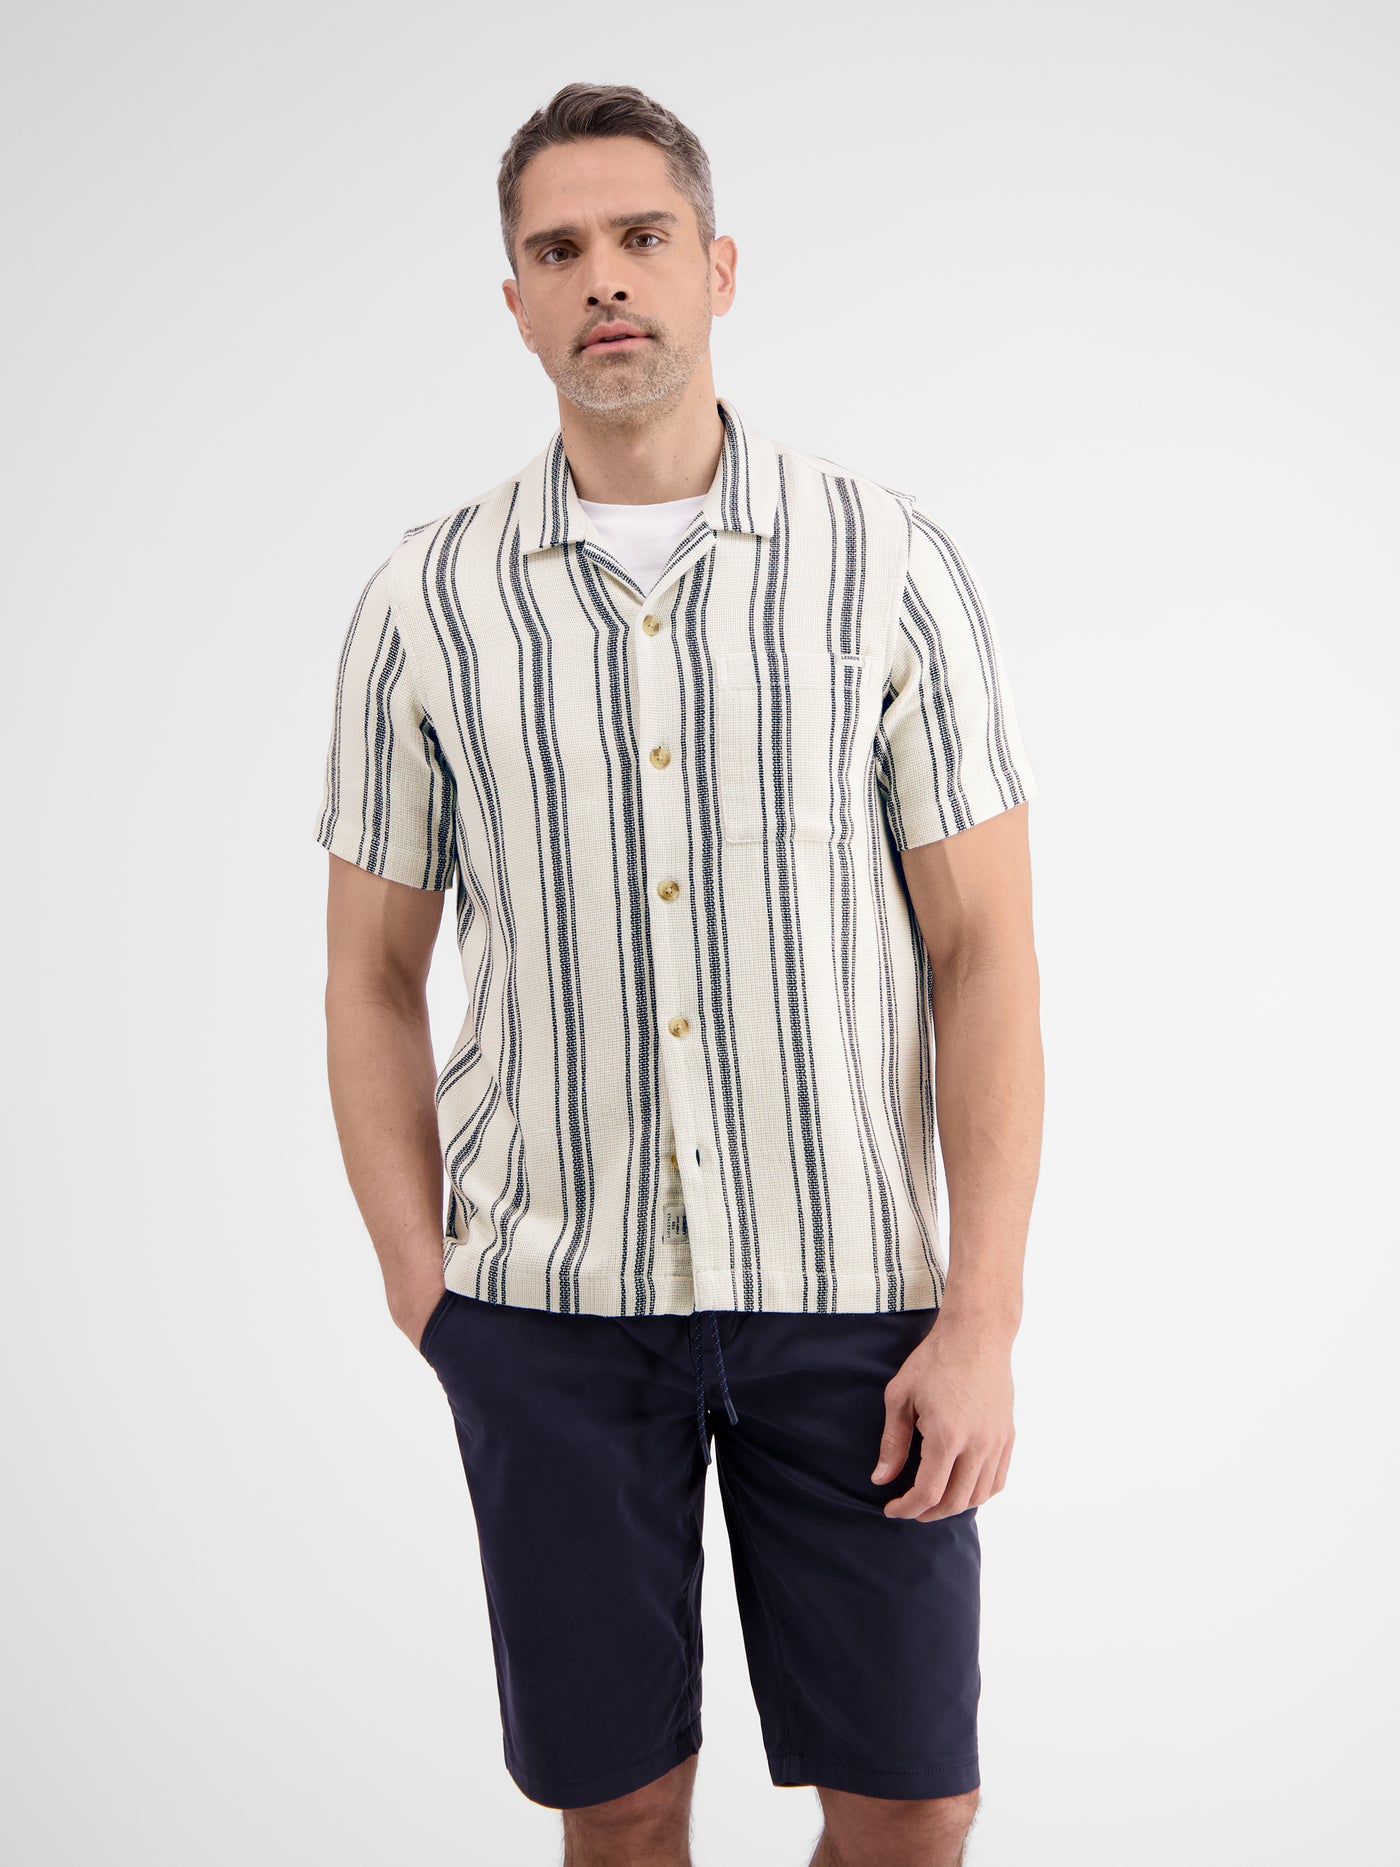 Striped shirt with fashionable resort collar